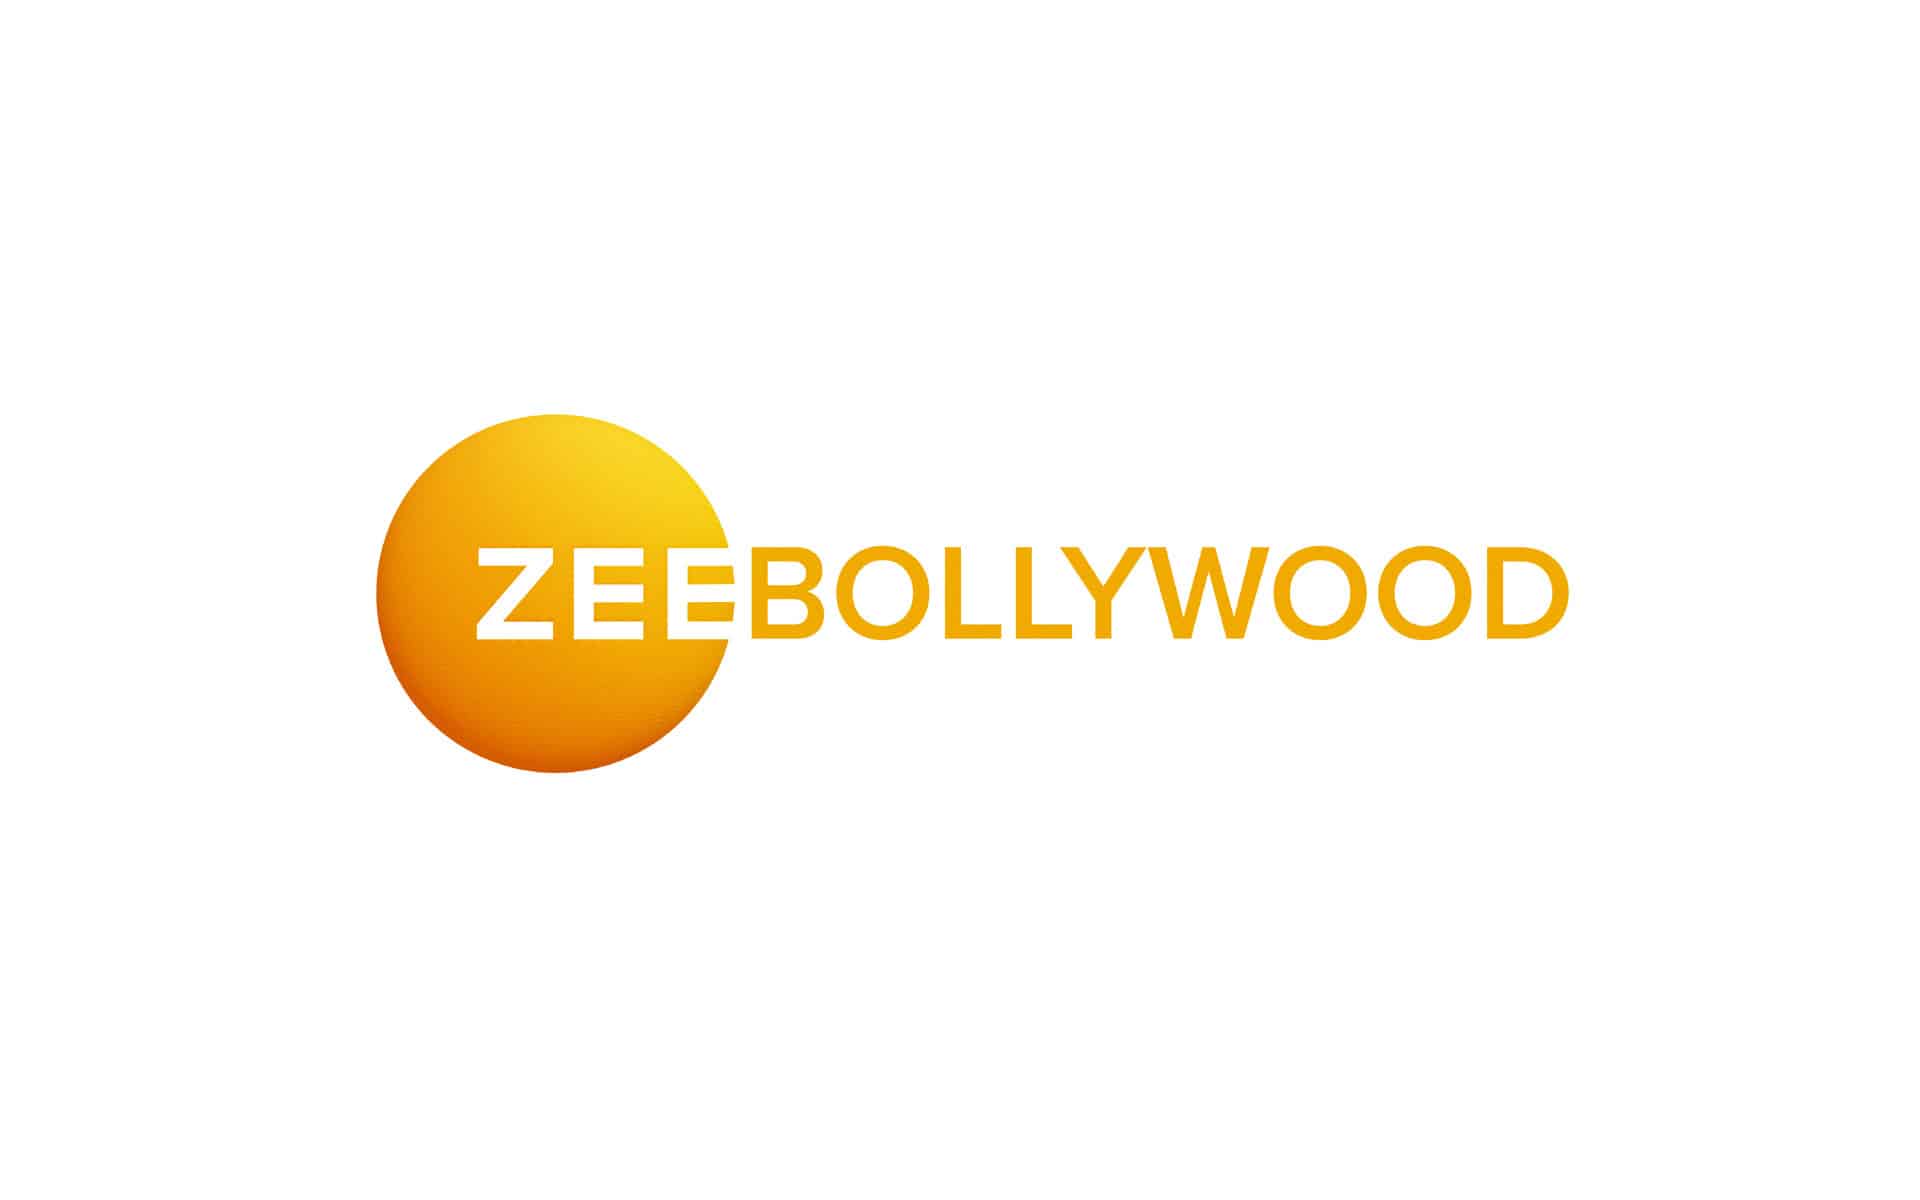 ZEE India officially unveils branding of ZEE Bollywood